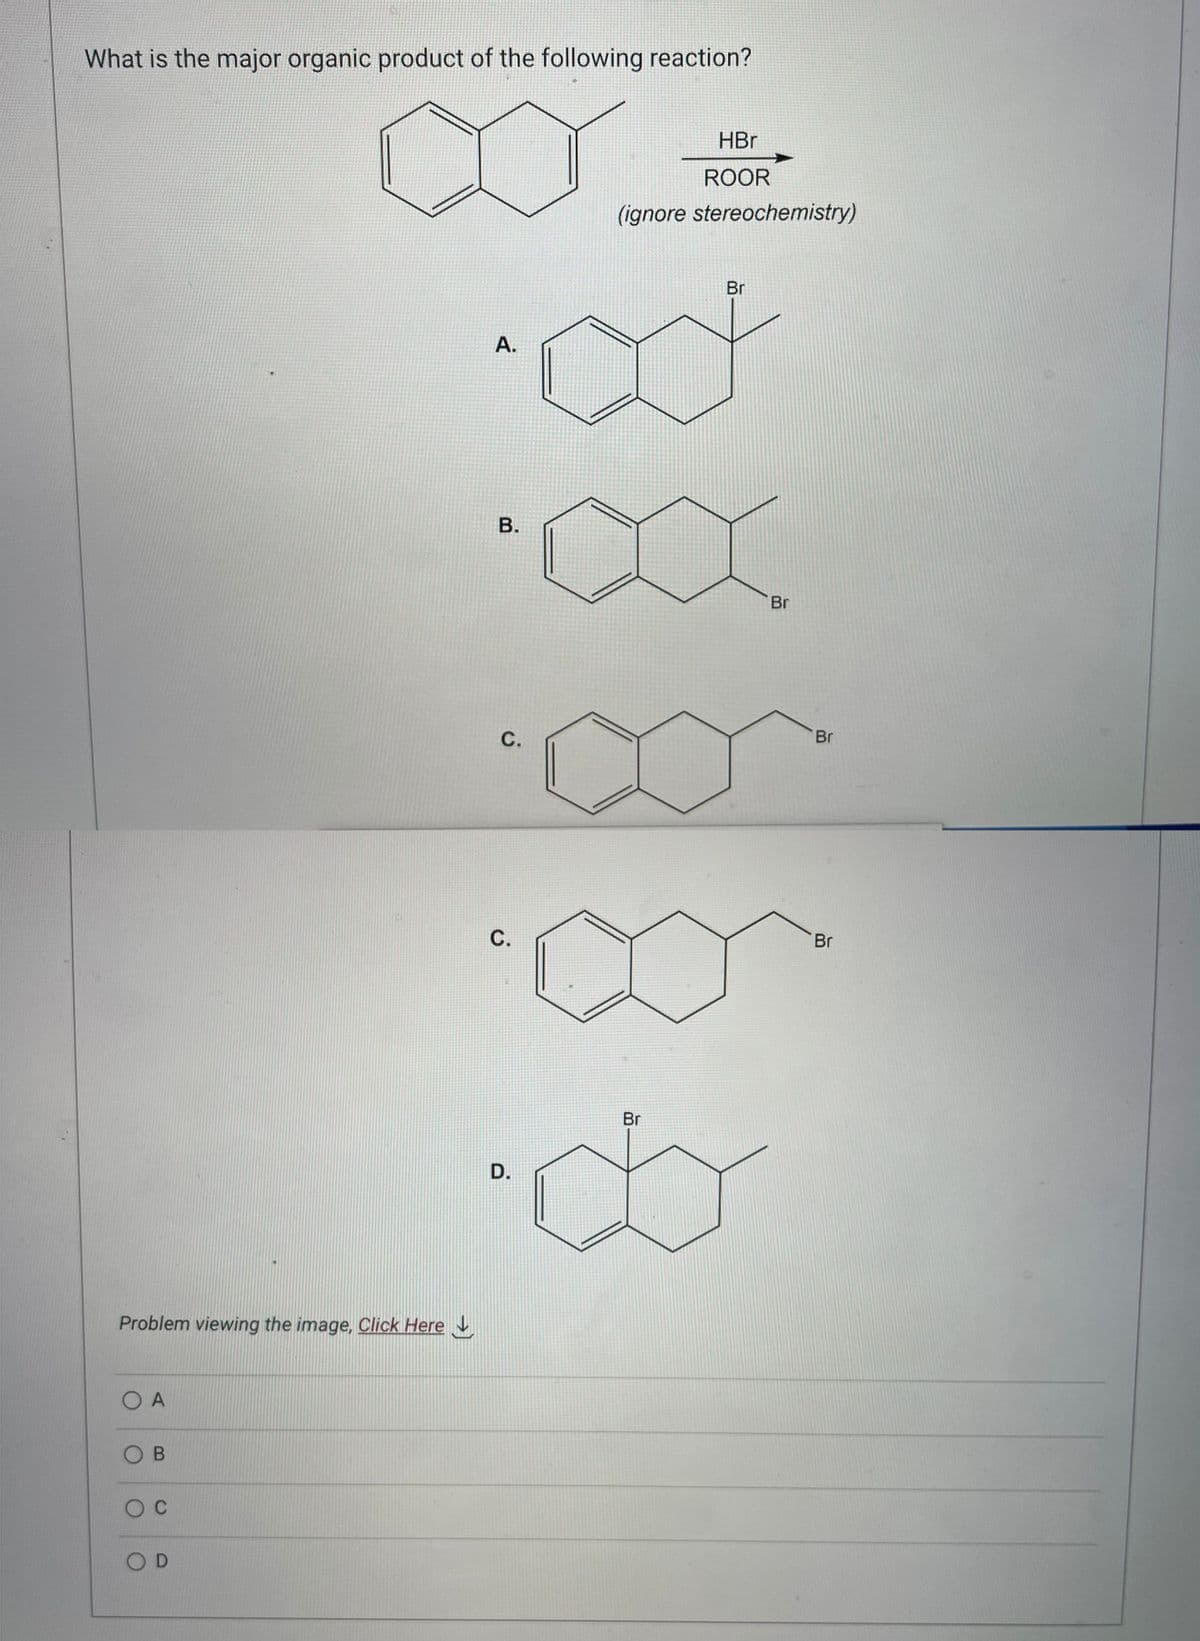 What is the major organic product of the following reaction?
Problem viewing the image. Click Here
Ο Α
OB
O C
OD
A.
B.
C.
C.
D.
HBr
ROOR
(ignore stereochemistry)
Br
ad
Br
Br
Br
Br